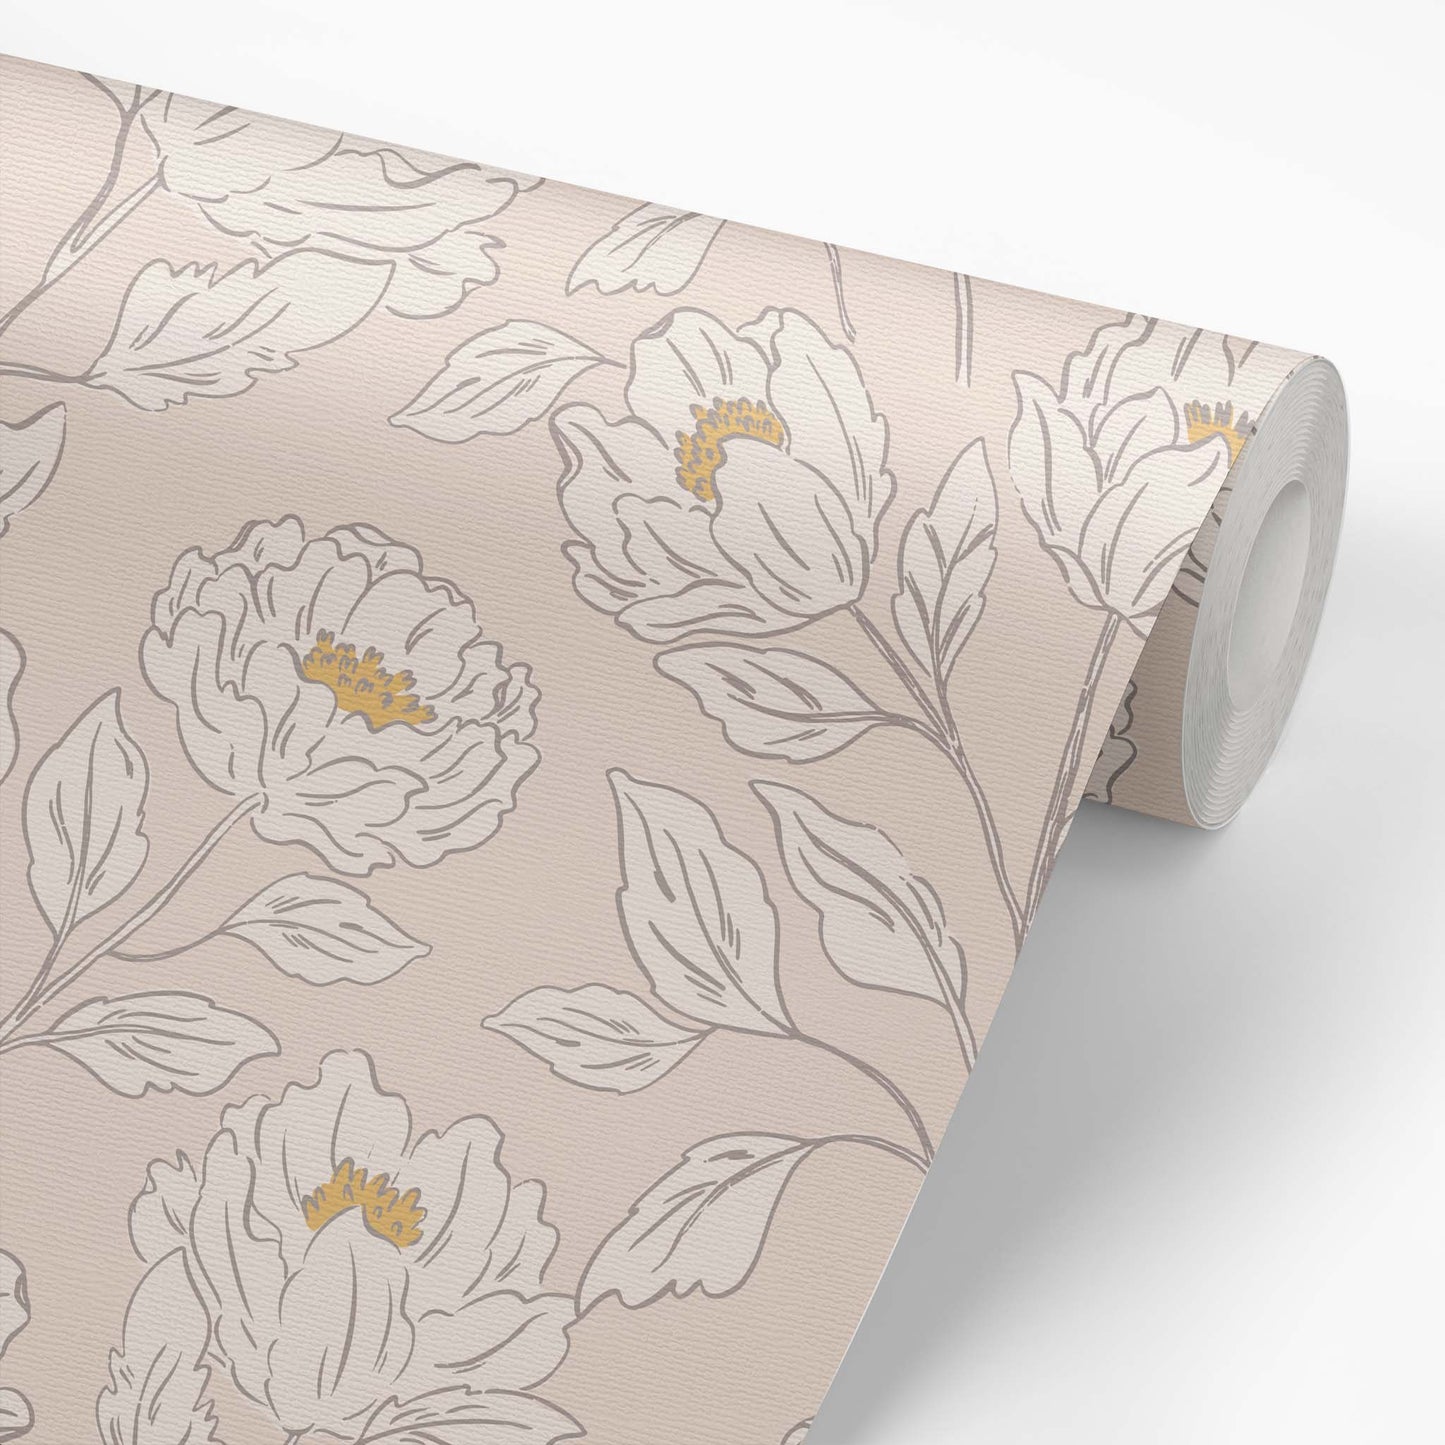 Wallpaper Roll featuring Floral Toile Peel and Stick, Removable Wallpaper in Blush